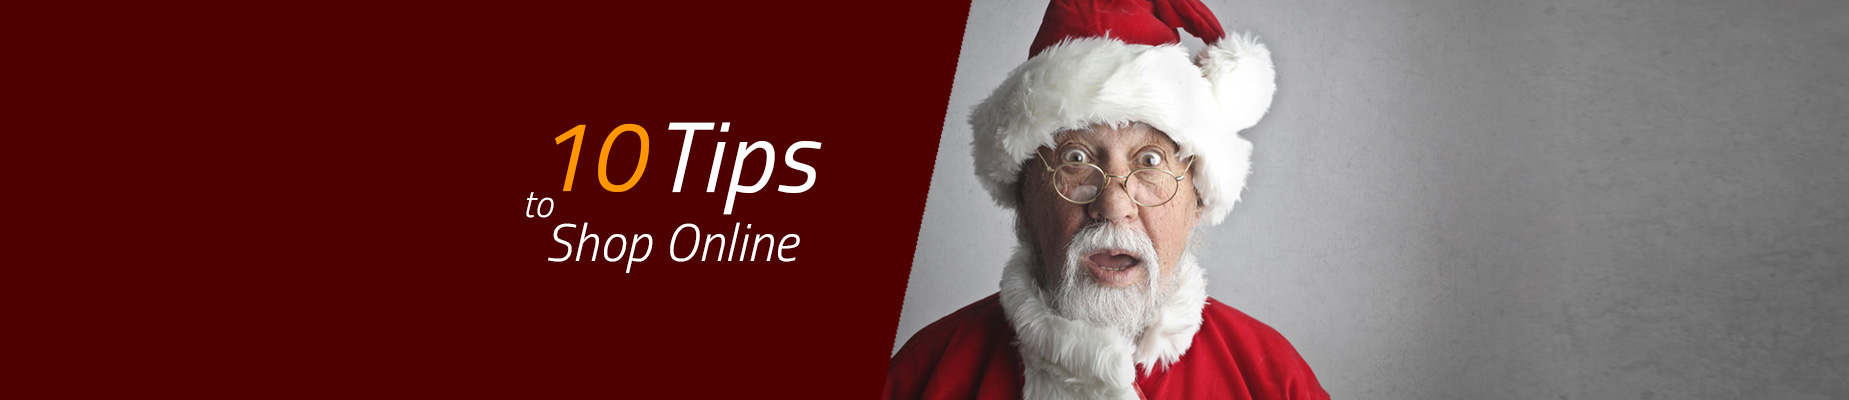 Christmas shopping online safely with these 10 tips